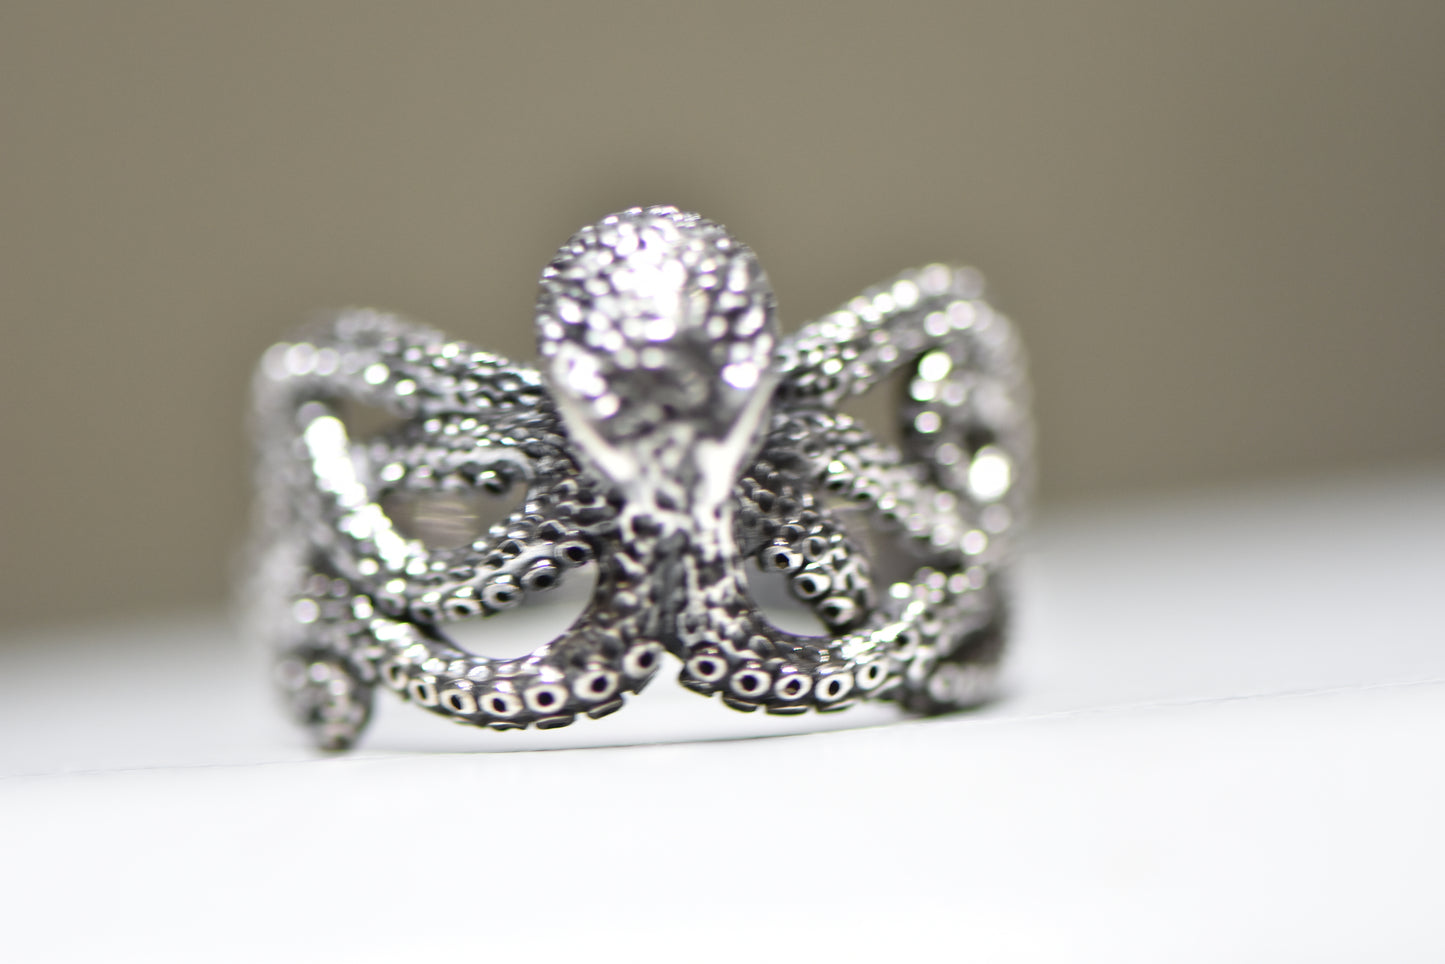 Octopus ring sterling silver band boho men Size 12